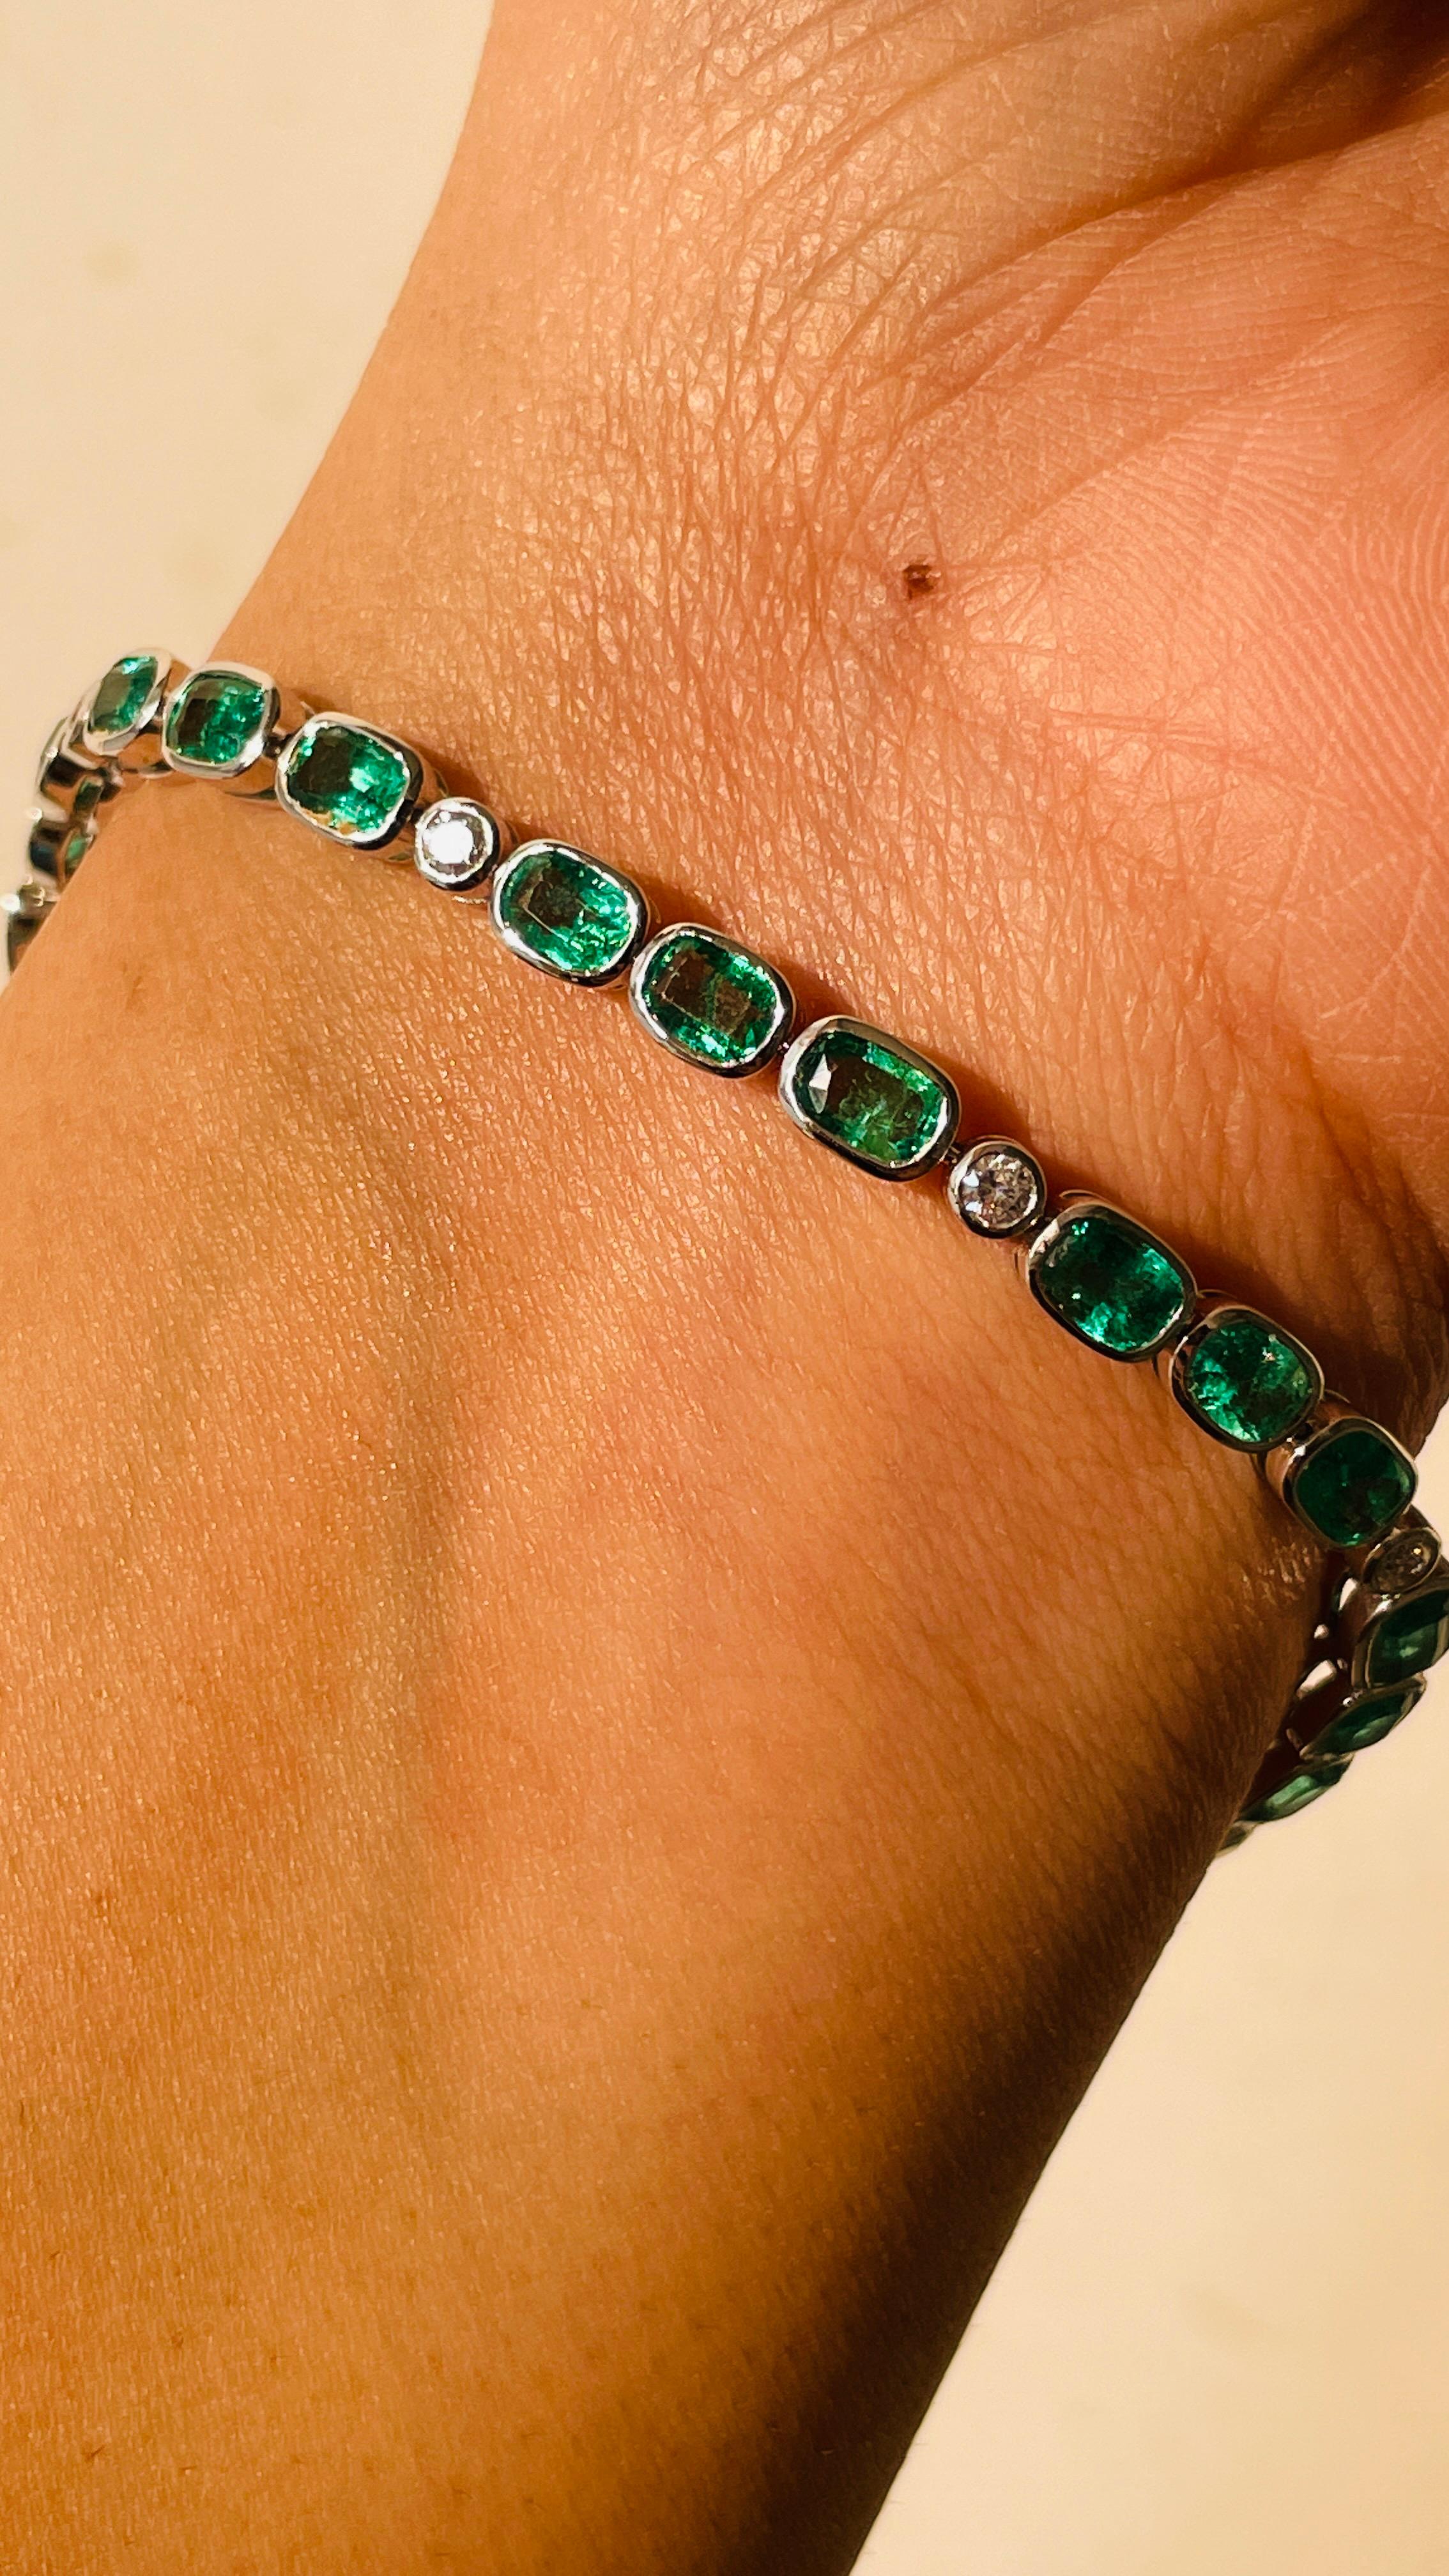 Emerald and Diamond bracelet in 18K Gold. It has a perfect cushion cut emerald to make you stand out on any occasion or an event.
A tennis bracelet is an essential piece of jewelry when it comes to your wedding day. The sleek and elegant style